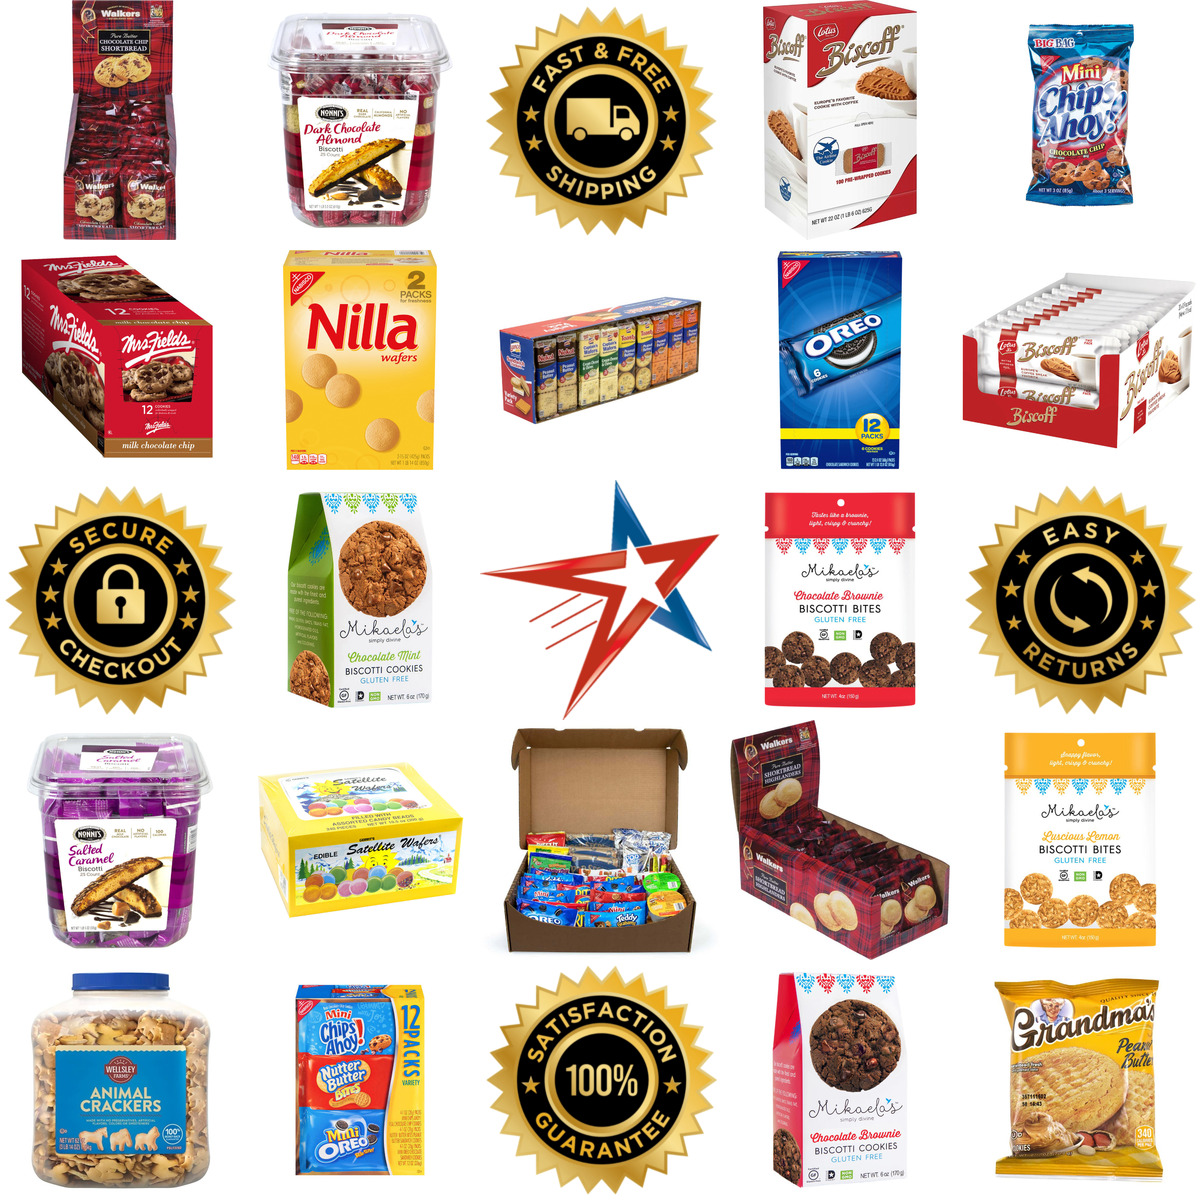 A selection of Cookies products on GoVets